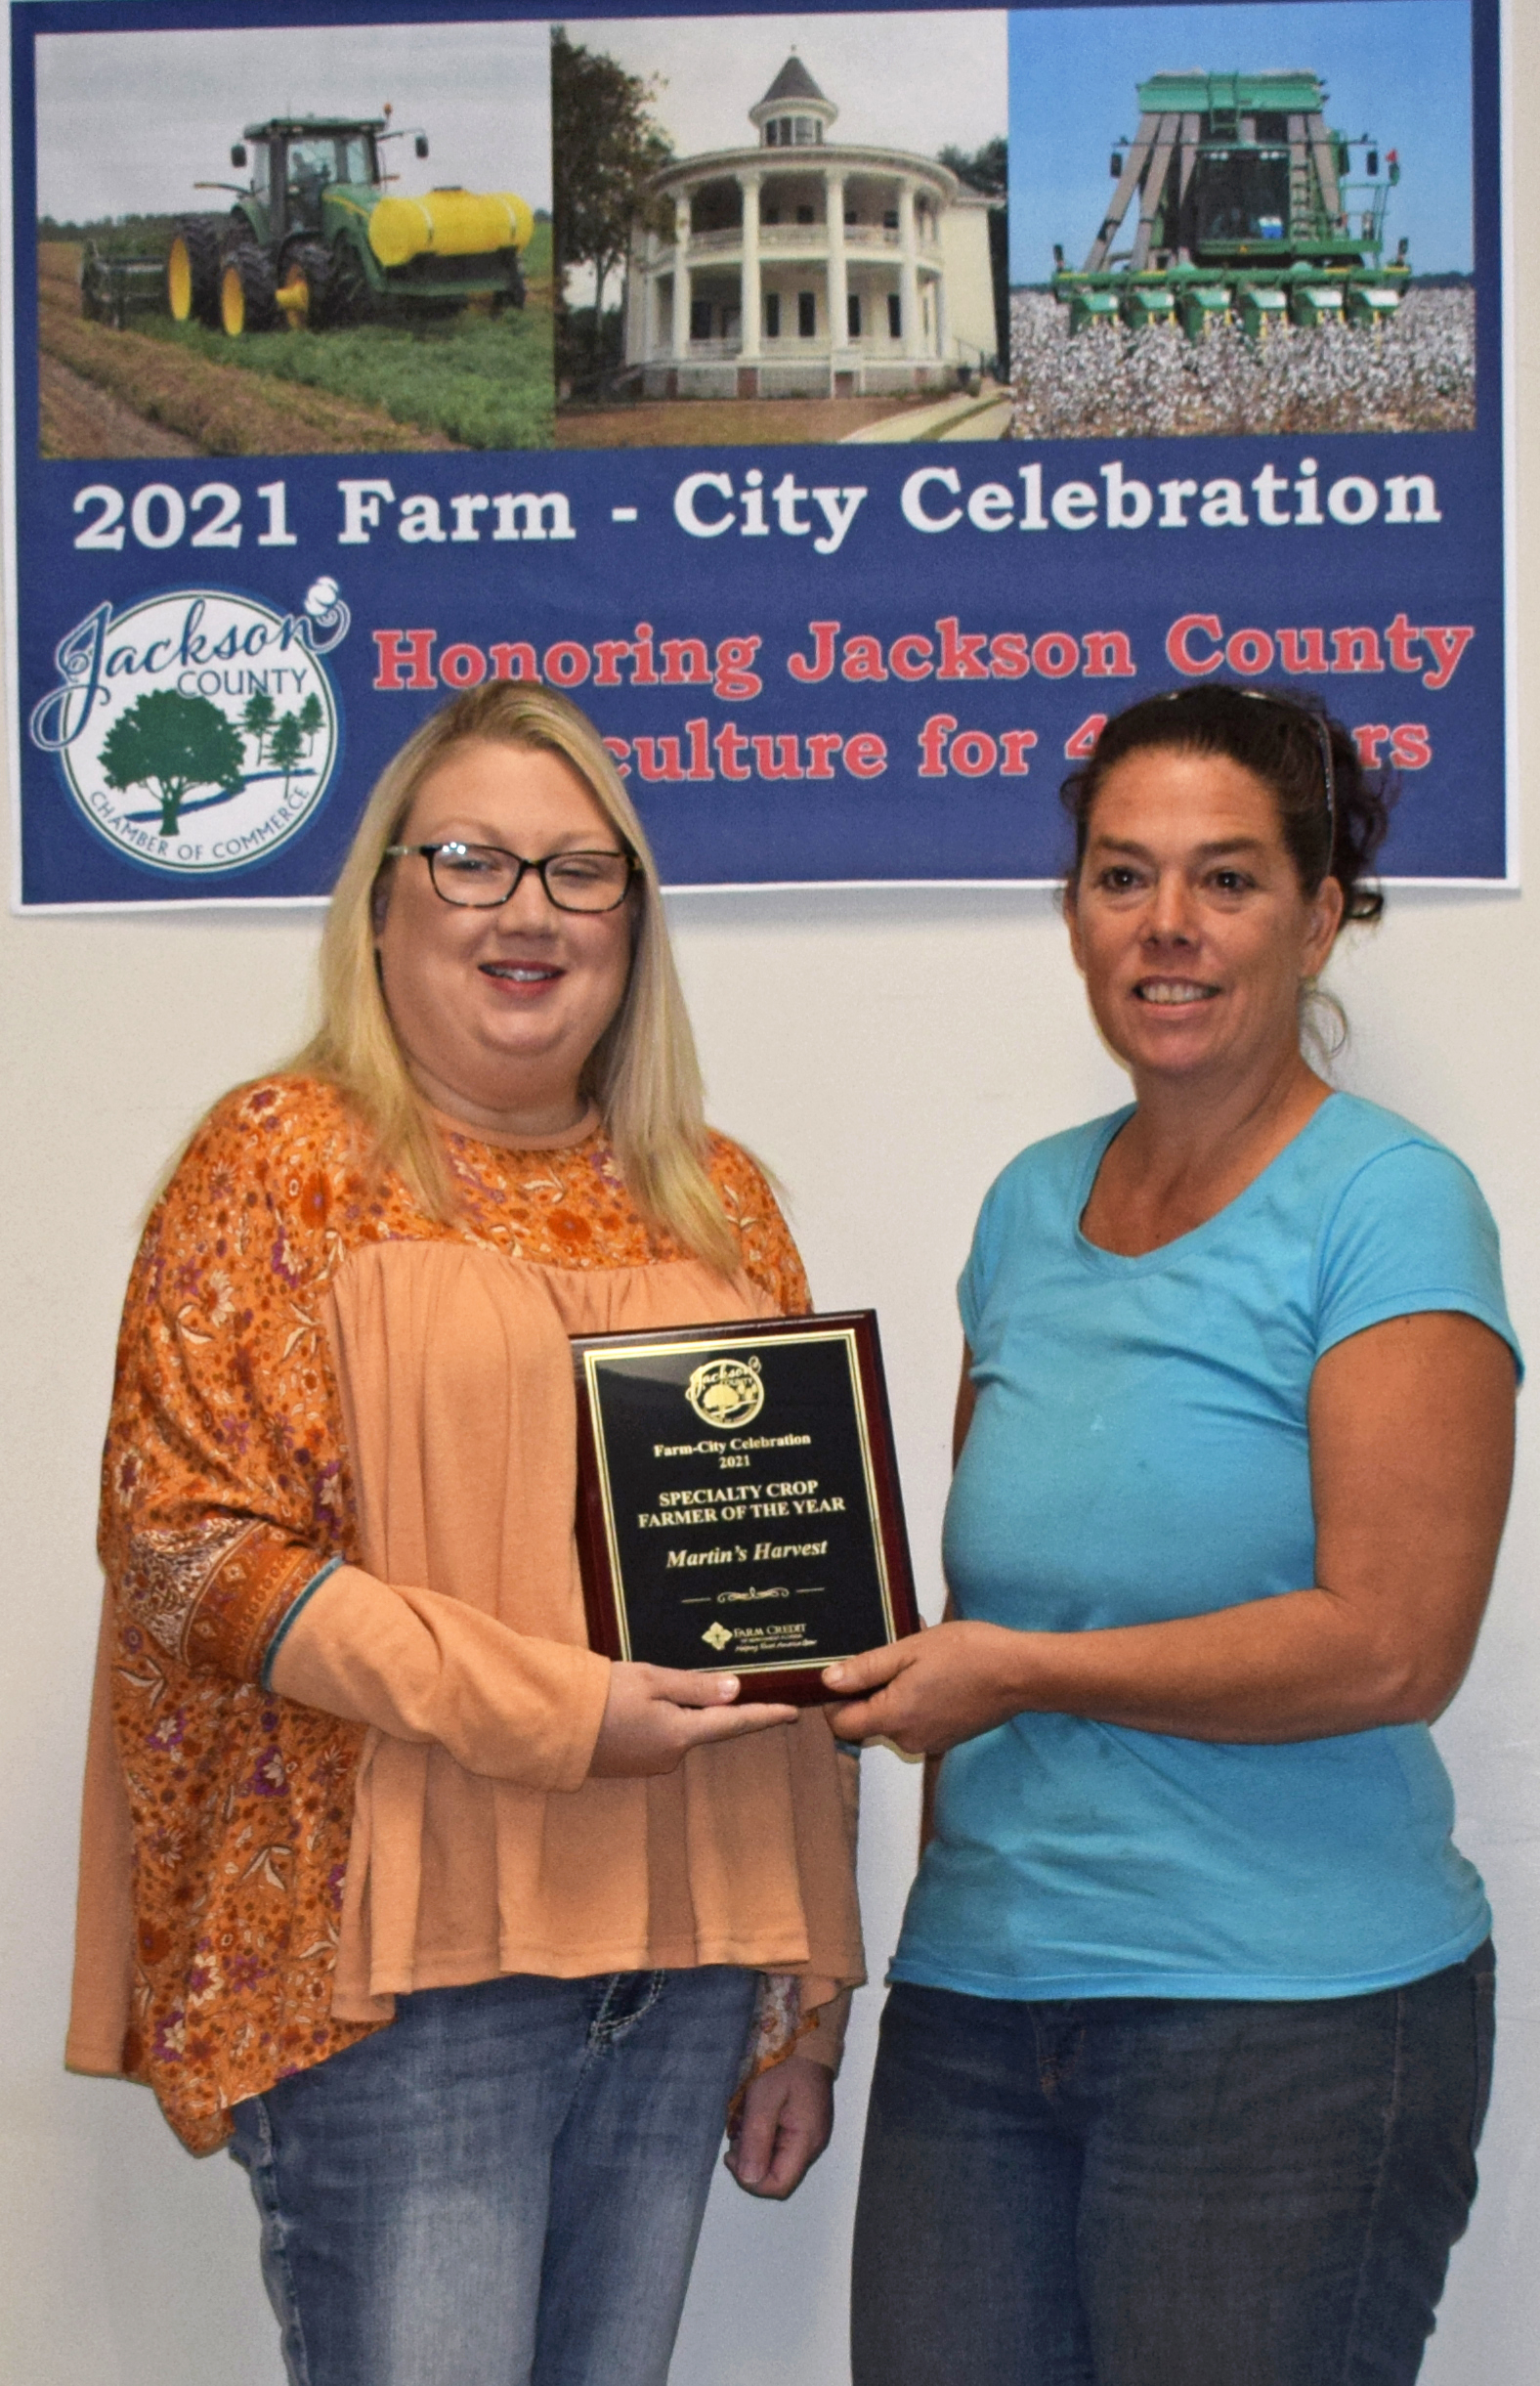 Martin's Harvest - 2021 Specialty Crop Farmers of the Year